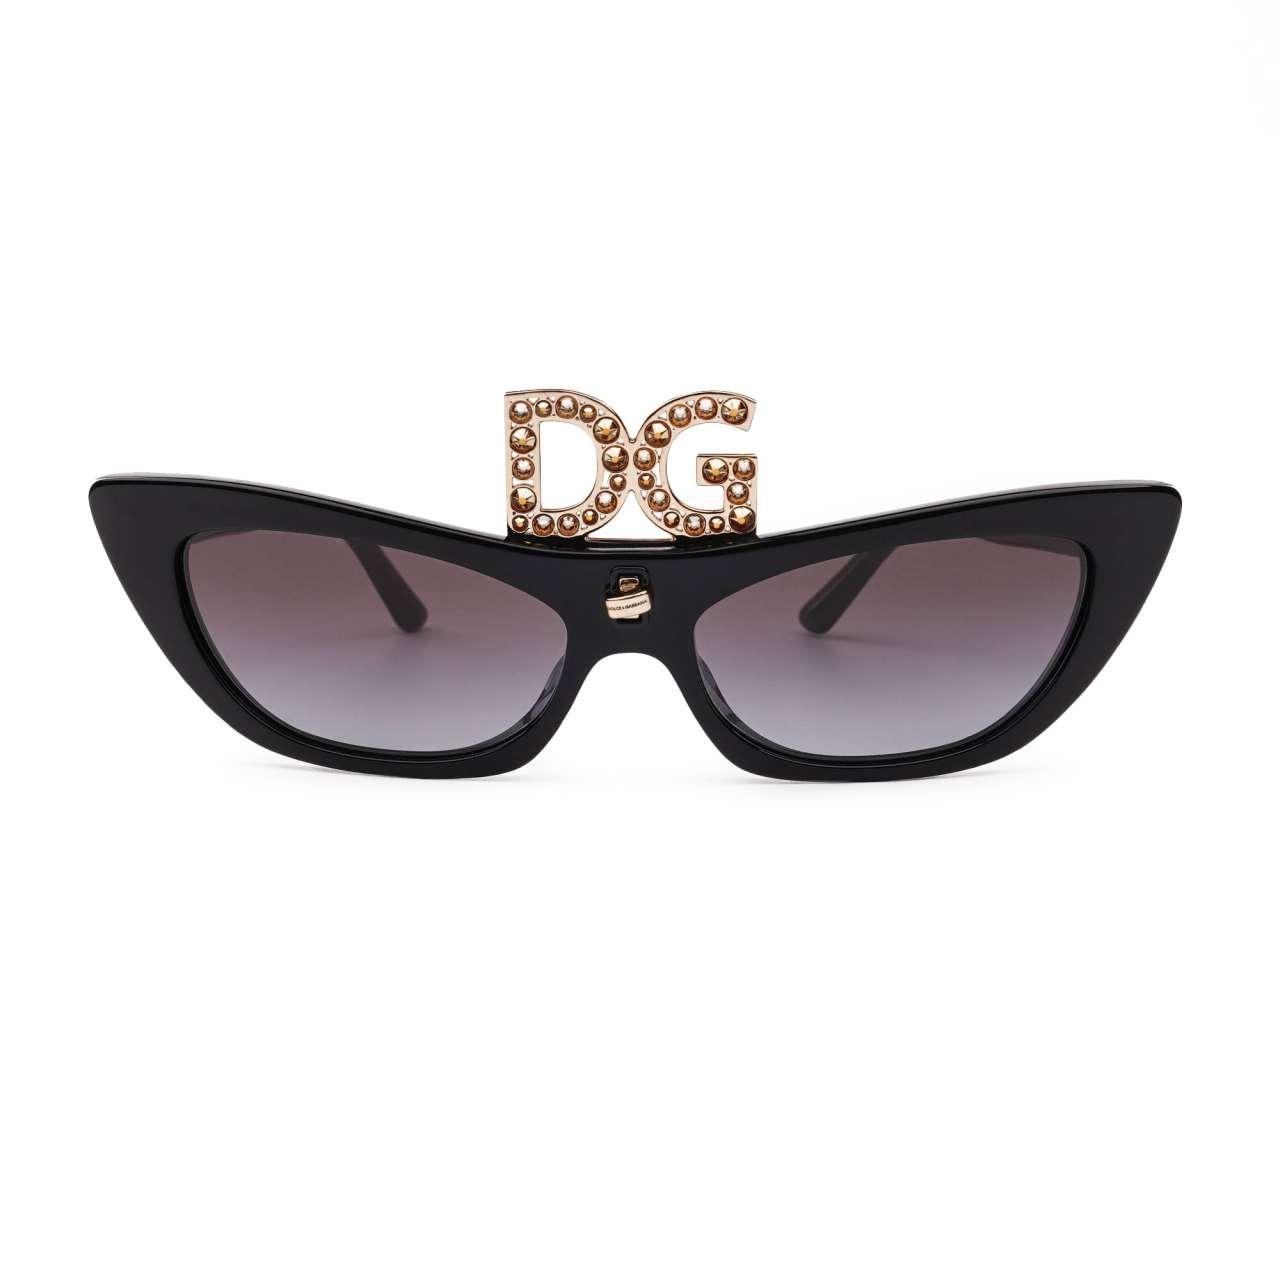 - Special Edition Cat Eye Sunglasses DG4334B with crystals embellished clip-on 